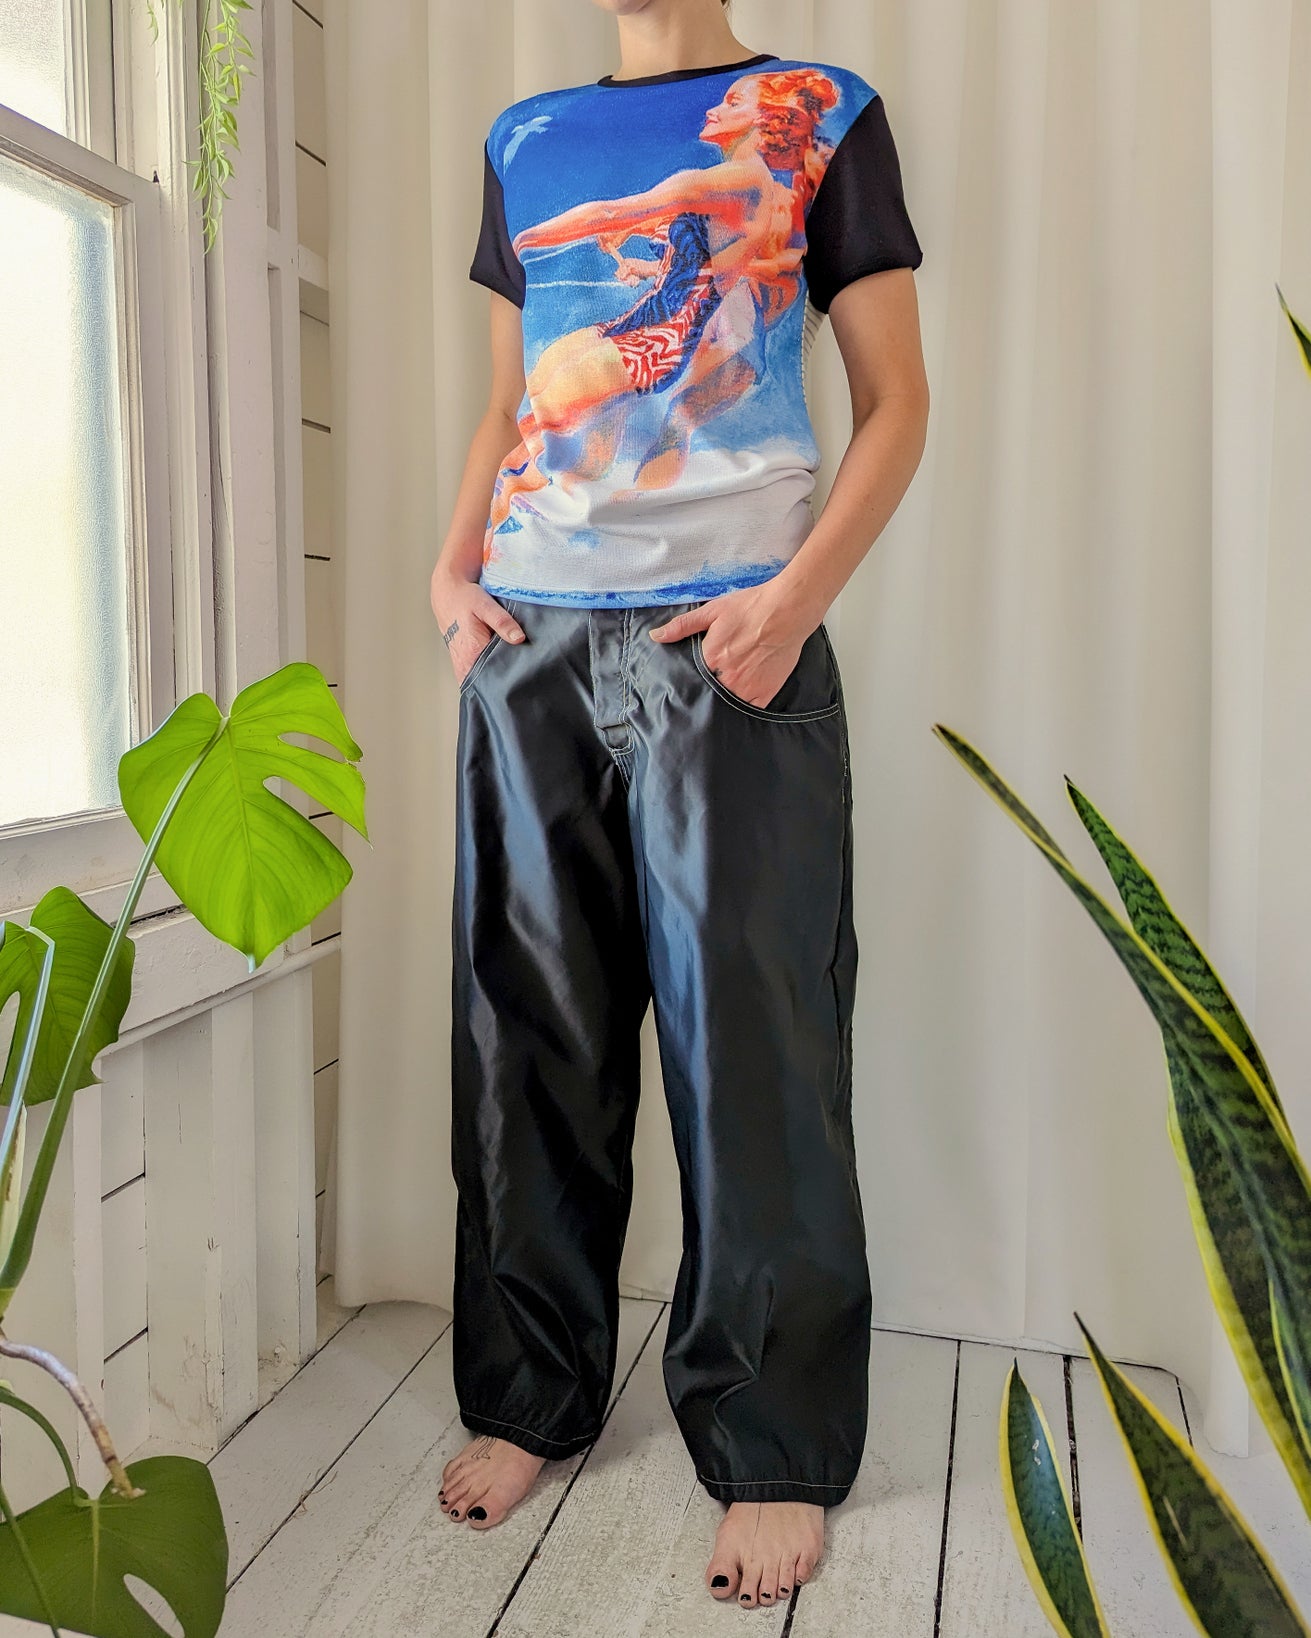 00's Rave Pant y2k - ワークパンツ